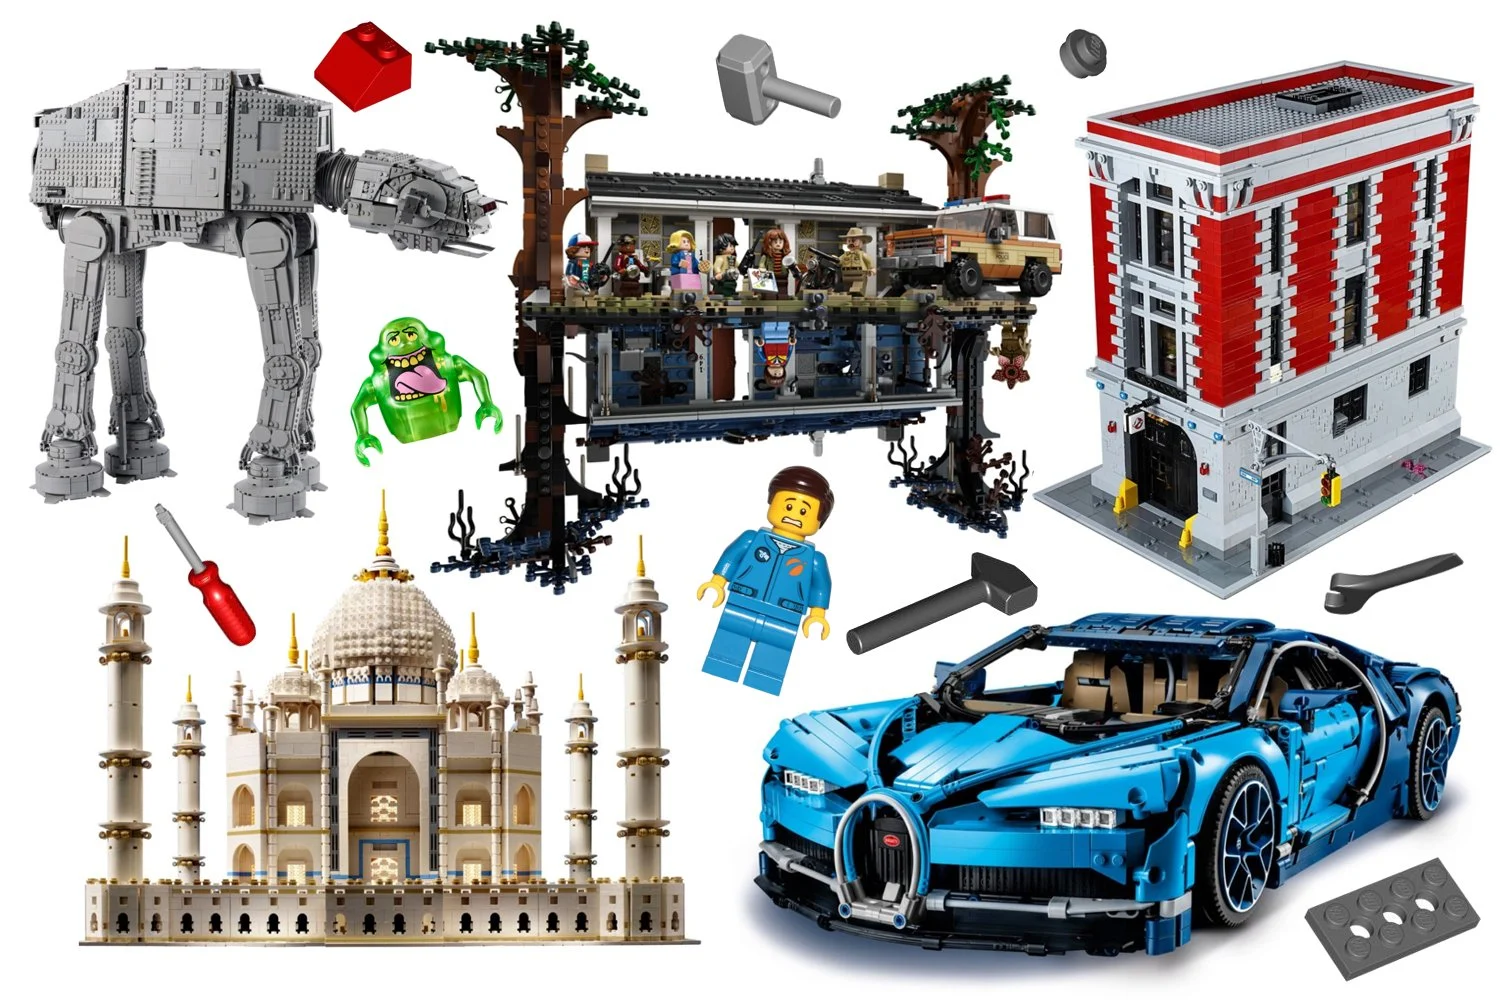 10 Hardest LEGO Sets to Build That’ll Test Your Skill and Patience